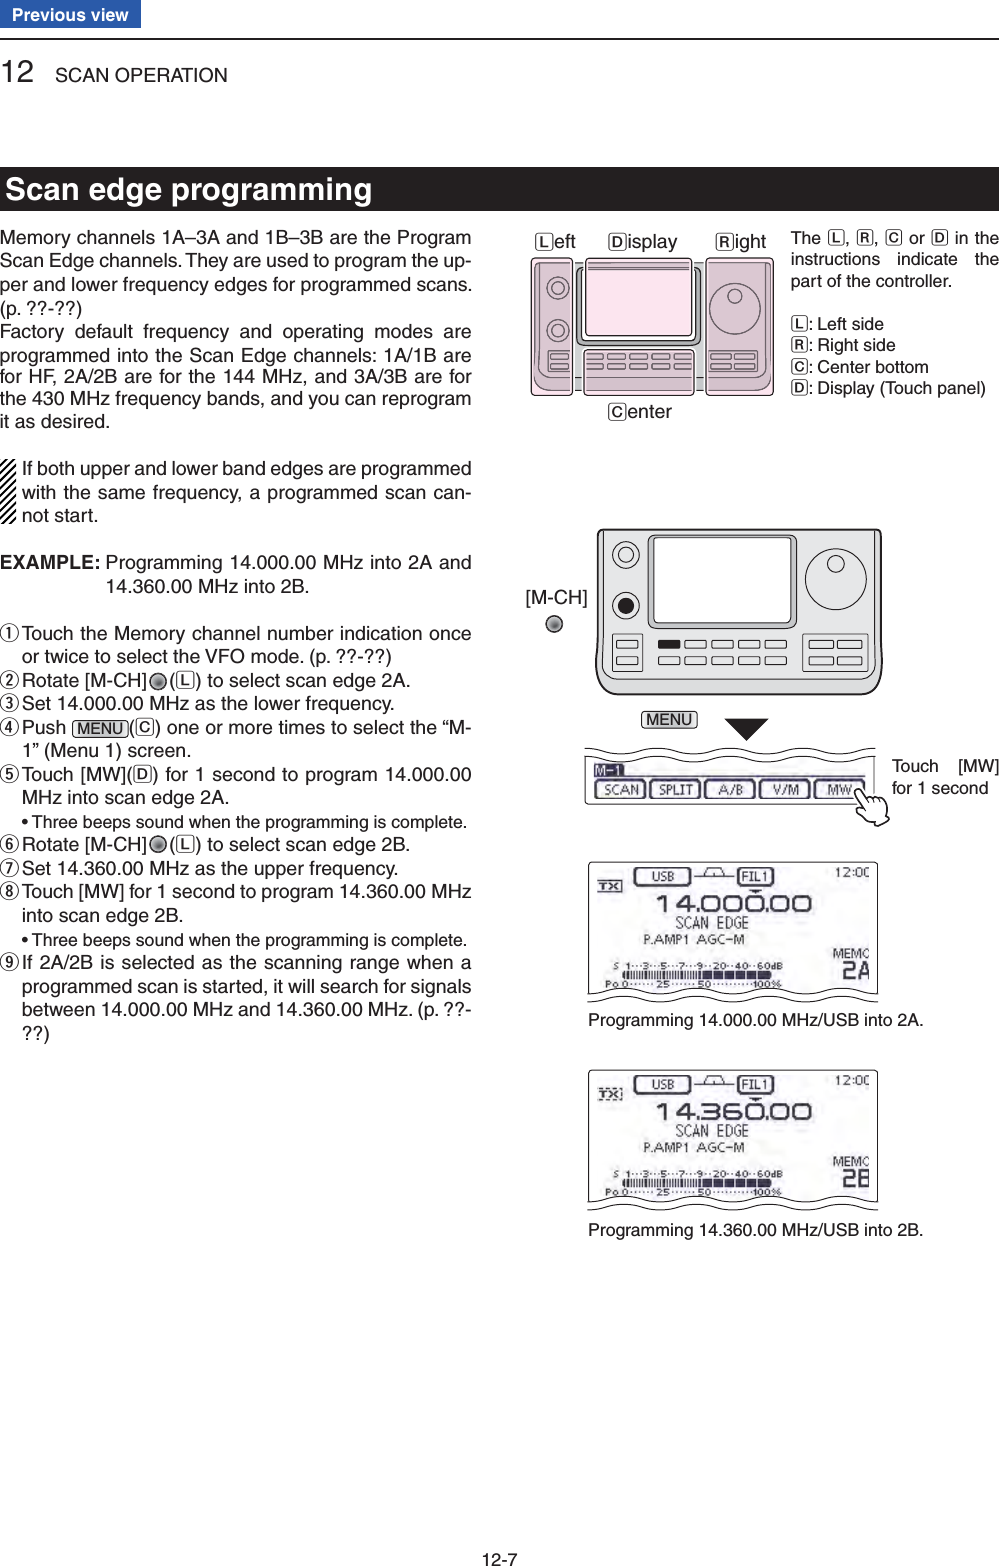 12 SCAN OPERATION12-7Previous viewMemory channels 1A–3A and 1B–3B are the Program Scan Edge channels. They are used to program the up-per and lower frequency edges for programmed scans. (p. ??-??)Factory default frequency and operating modes are programmed into the Scan Edge channels: 1A/1B are for HF, 2A/2B are for the 144 MHz, and 3A/3B are for the 430 MHz frequency bands, and you can reprogram it as desired.If both upper and lower band edges are programmed with the same frequency, a programmed scan can-not start.EXAMPLE:  Programming 14.000.00 MHz into 2A and 14.360.00 MHz into 2B. Touch the Memory channel number indication once  qor twice to select the VFO mode. (p. ??-??)Rotate [M-CH] w(L) to select scan edge 2A.Set 14.000.00 MHz as the lower frequency. e Push  rMENU (C) one or more times to select the “M-1” (Menu 1) screen. Touch [MW]( tD) for 1 second to program 14.000.00 MHz into scan edge 2A. •  Three beeps sound when the programming is complete.Rotate [M-CH] y(L) to select scan edge 2B.Set 14.360.00 MHz as the upper frequency. u Touch [MW] for 1 second to program 14.360.00 MHz  iinto scan edge 2B. •  Three beeps sound when the programming is complete. If 2A/2B is selected as the scanning range when a  oprogrammed scan is started, it will search for signals between 14.000.00 MHz and 14.360.00 MHz. (p. ??-??)[M-CH]MENUTouch [MW]for 1 secondProgramming 14.000.00 MHz/USB into 2A.Programming 14.360.00 MHz/USB into 2B.Scan edge programmingThe L, R, C or D in the instructions indicate the part of the controller.L: Left sideR: Right sideC: Center bottomD: Display (Touch panel)Left RightCenterDisplay